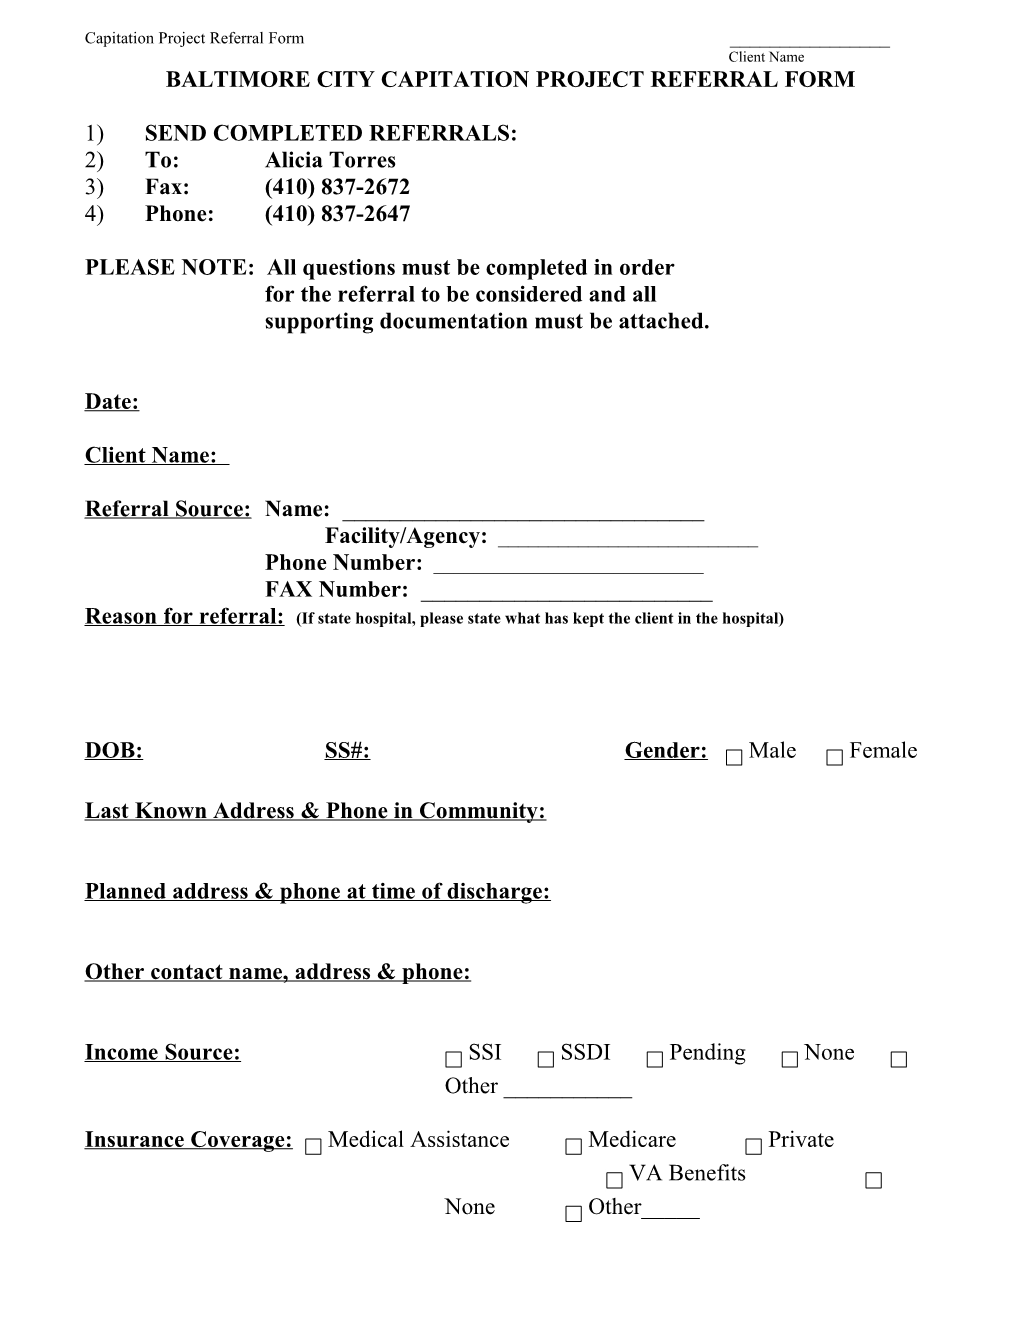 Baltimore Capitation Project Referral Form